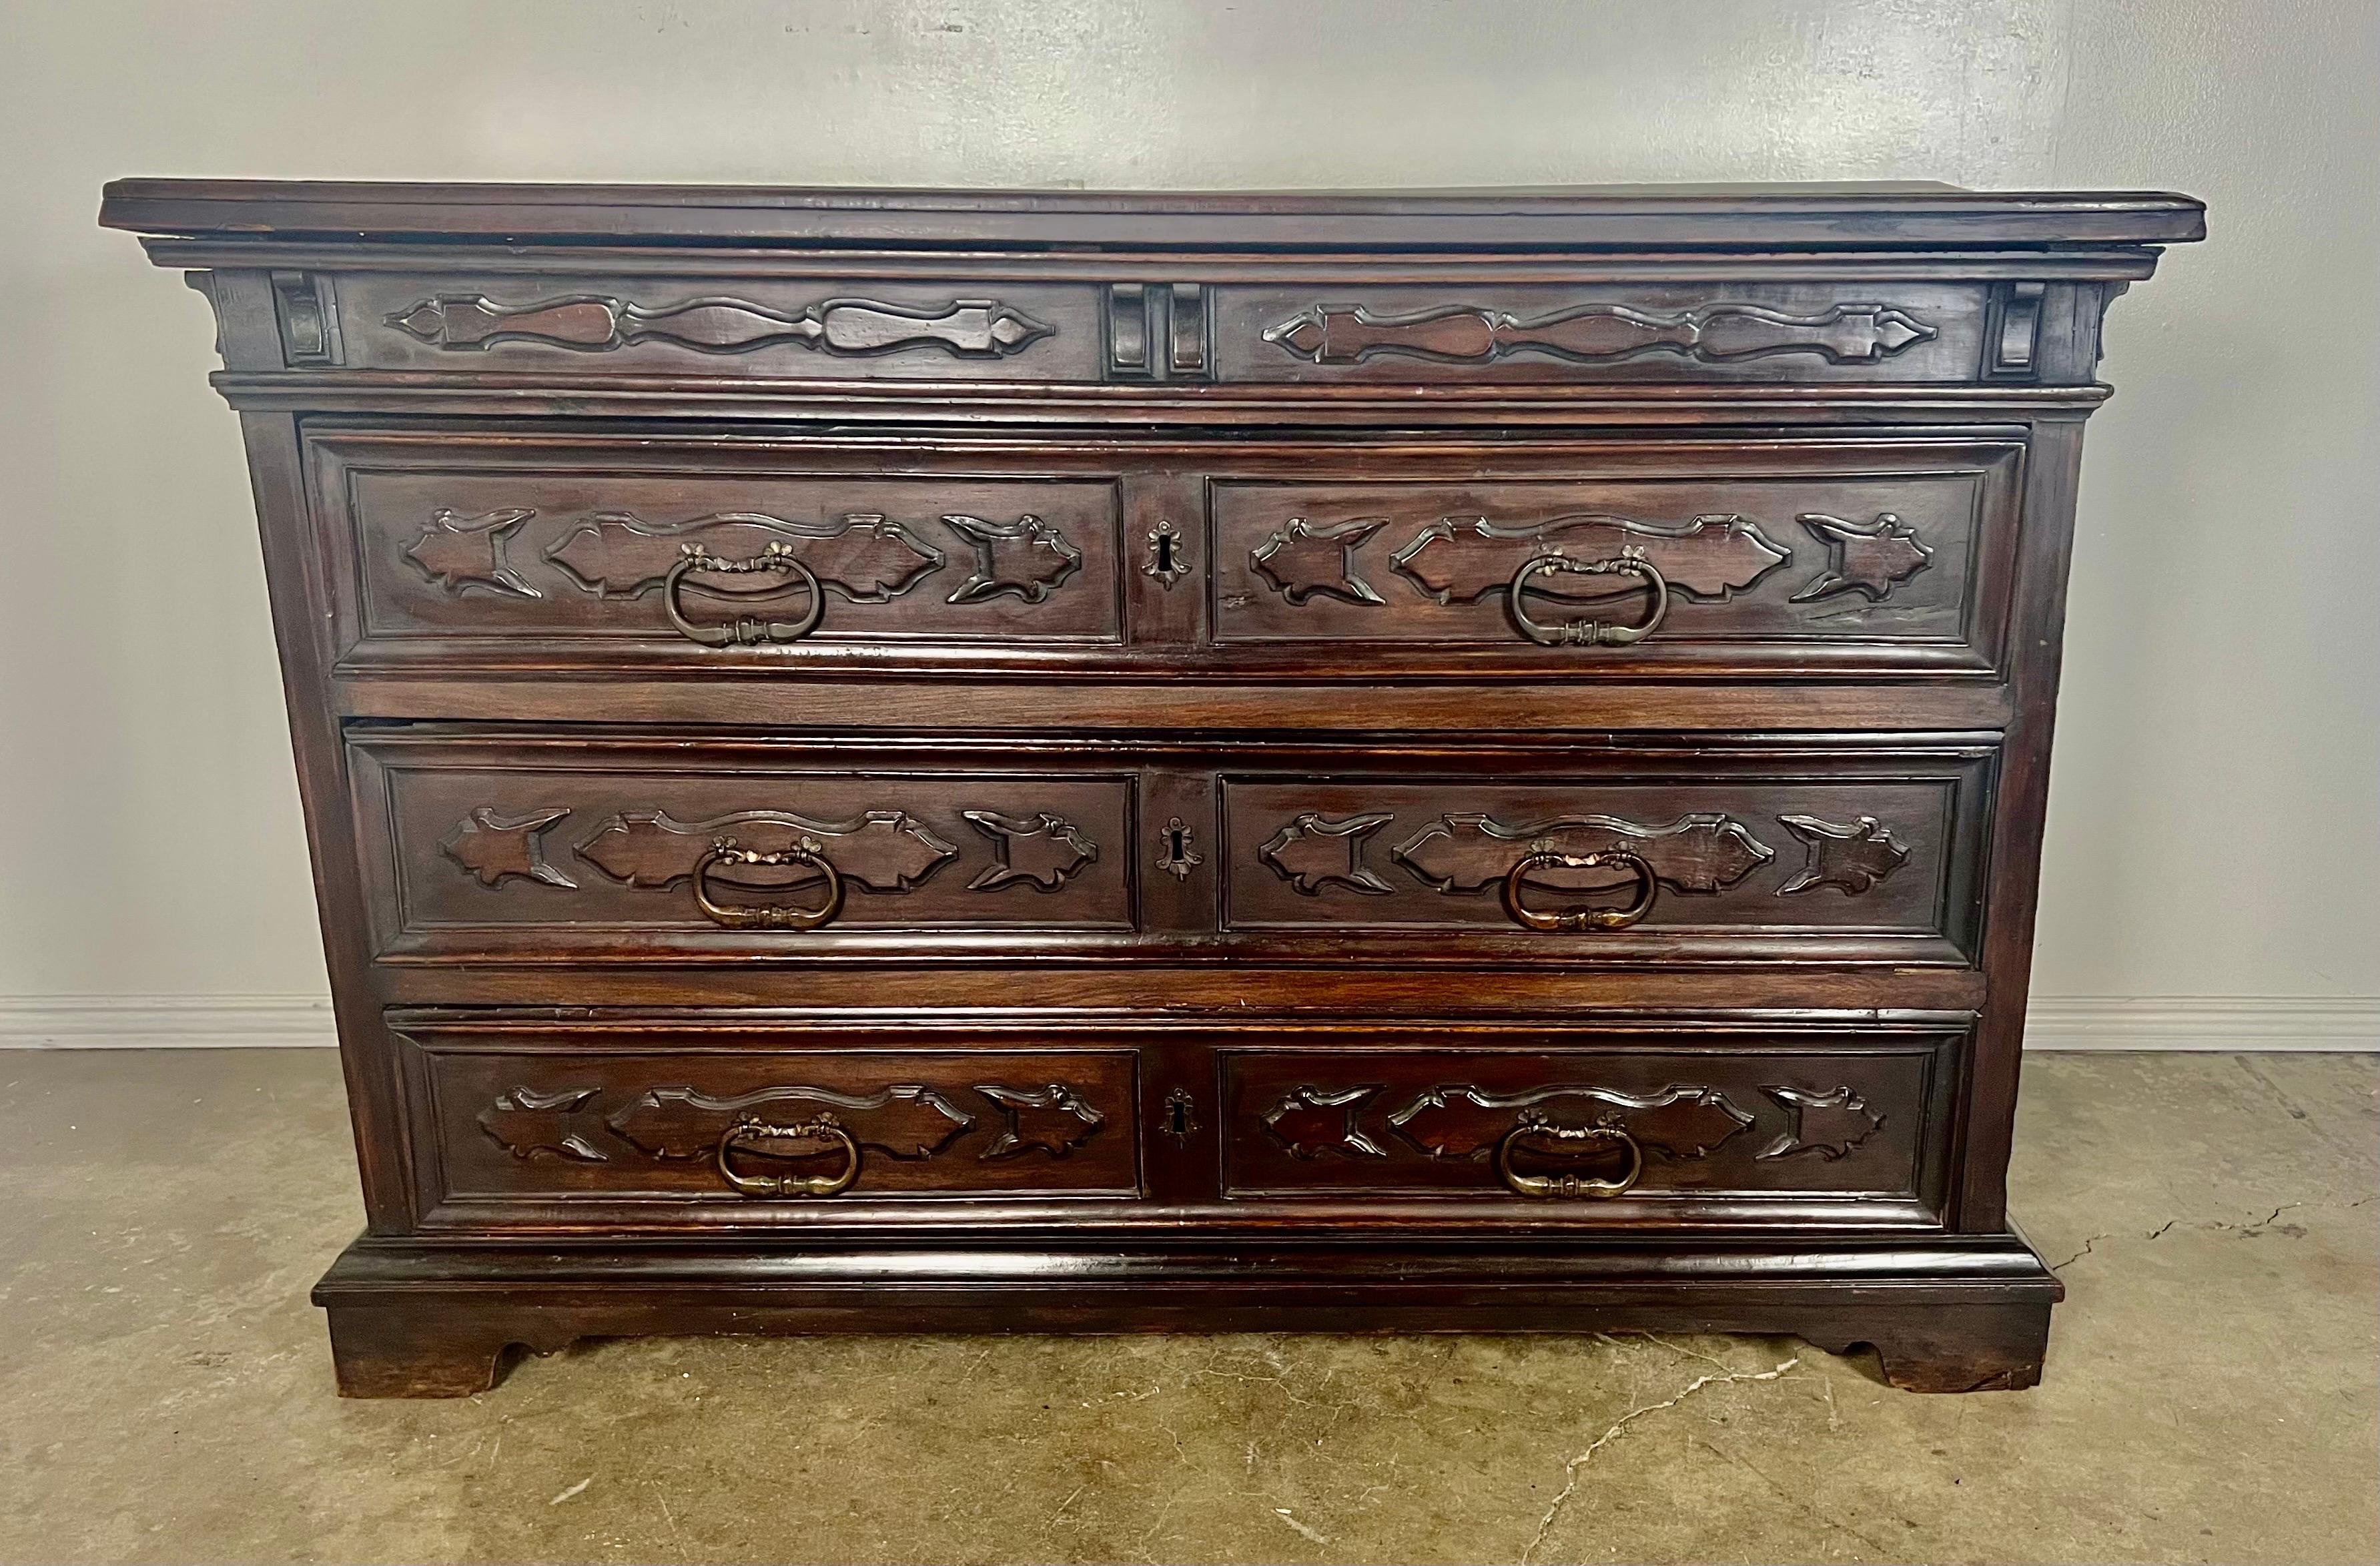 19th C. Italian walnut Renaissance style chest of drawers. There are eight drawers for plenty of storage. This handsome piece still has it's original hardware.